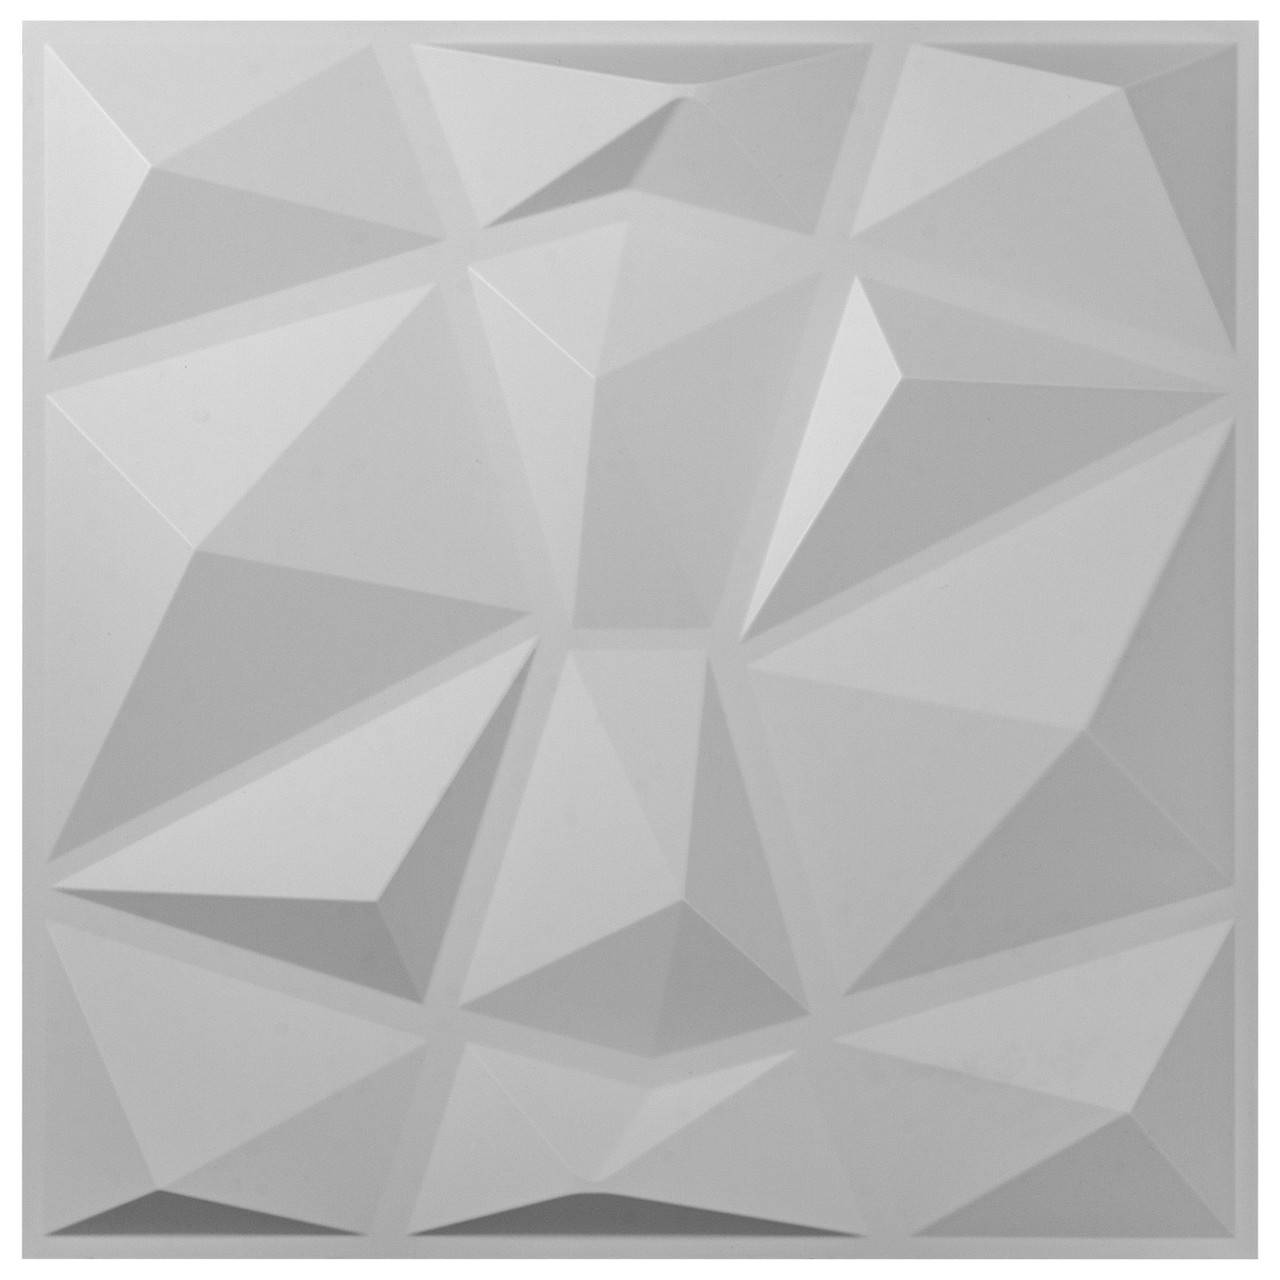 13 Pack 19.7x19.7Inches Diamond White 3D PVC Wave Panels for Interior Wall Decor Textured 3D Wall Tiles 32 Sq Ft